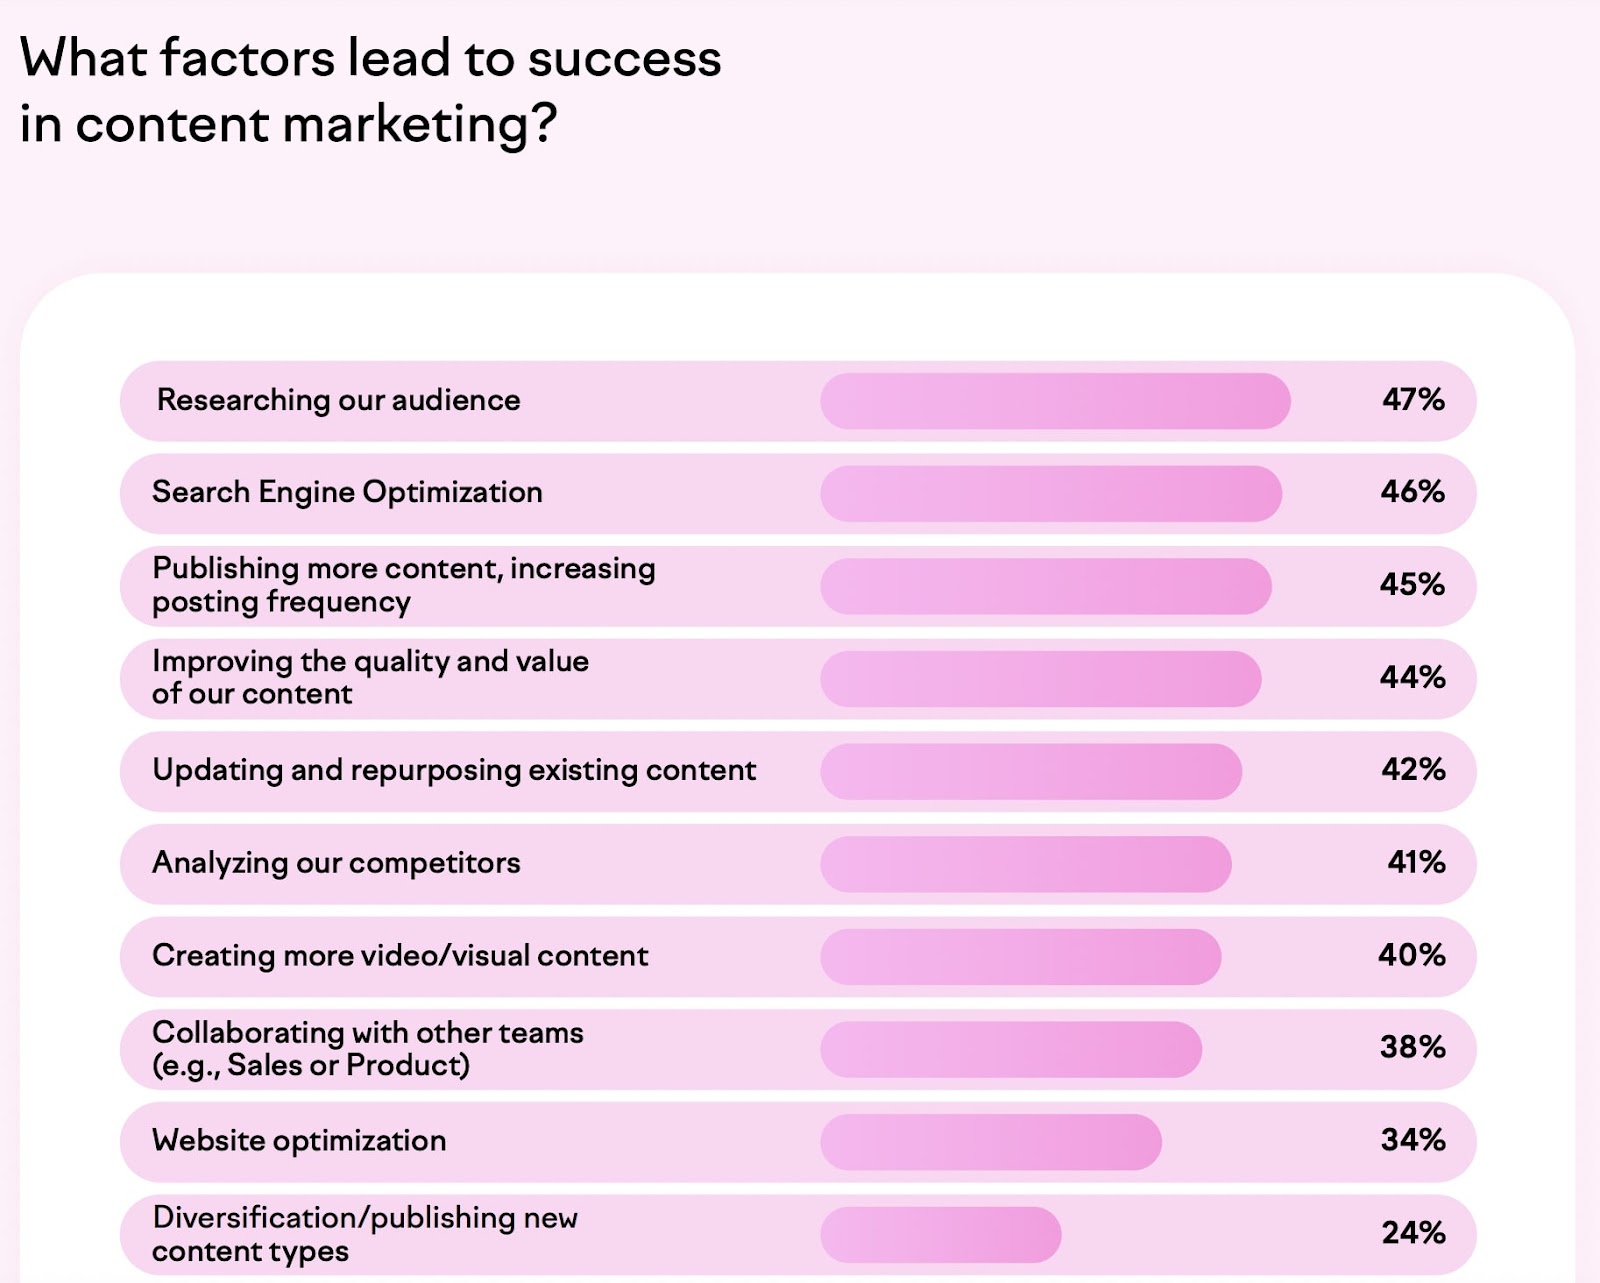 What factors lead to success in content marketing?